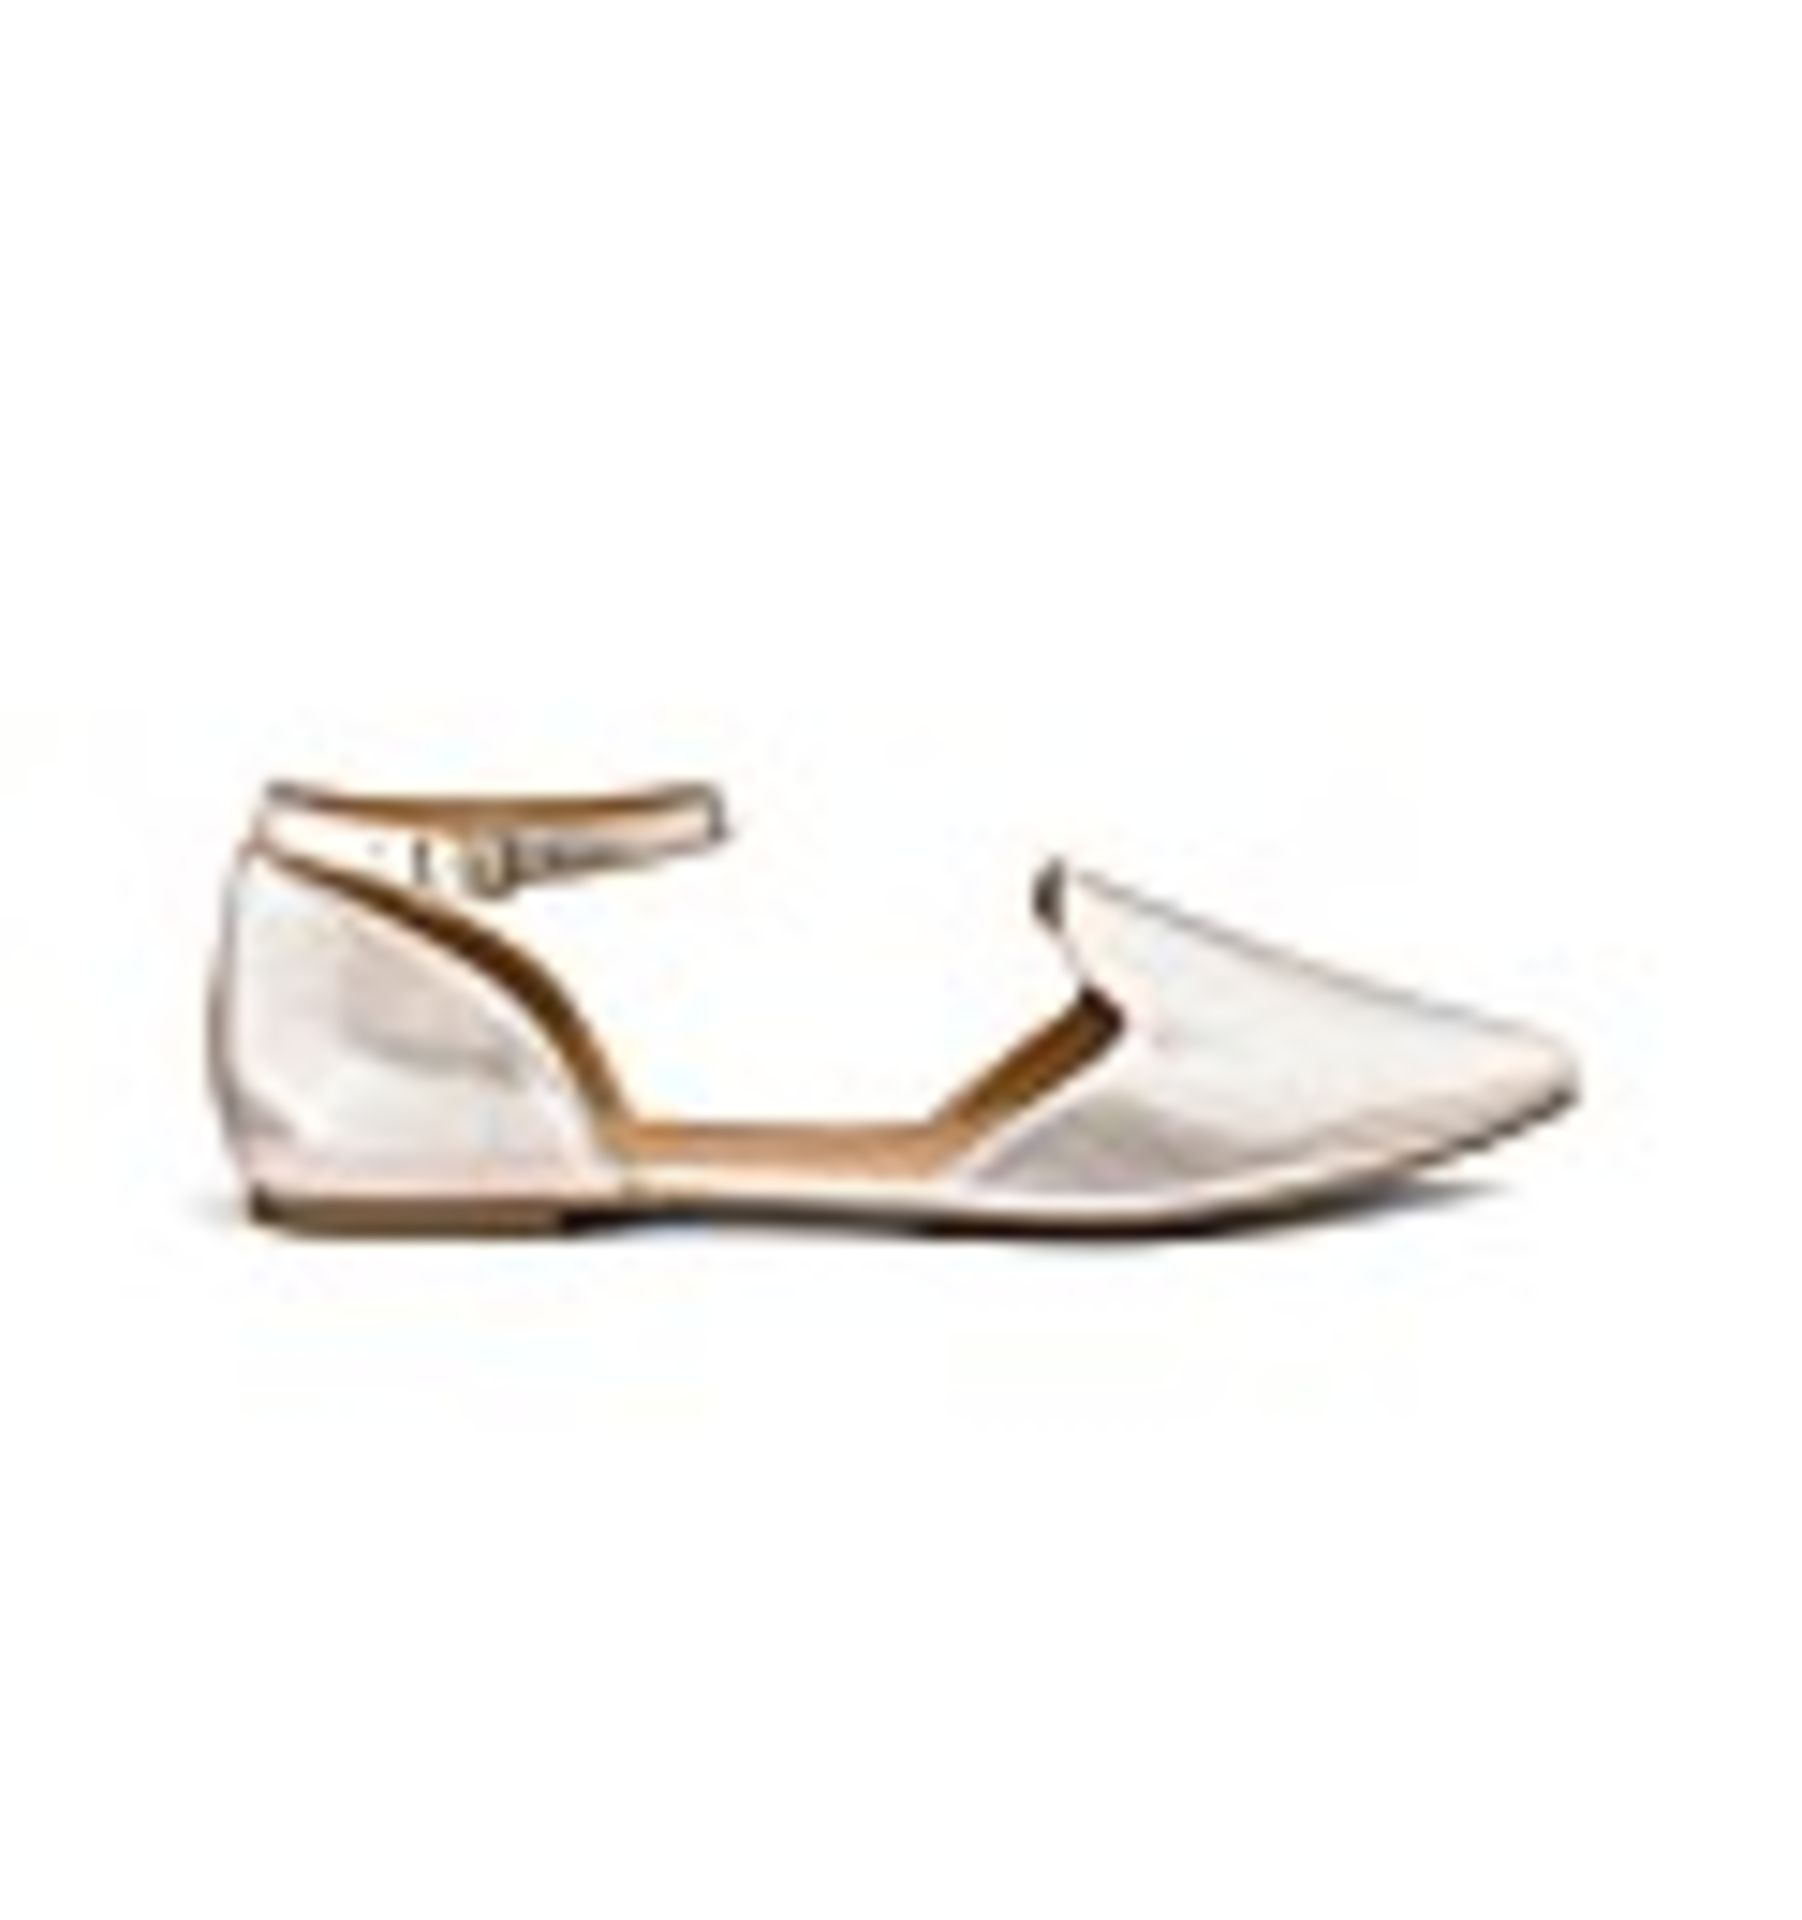 + VAT Brand New Pair Ladies Gold EEE Fit Shoes Size 4